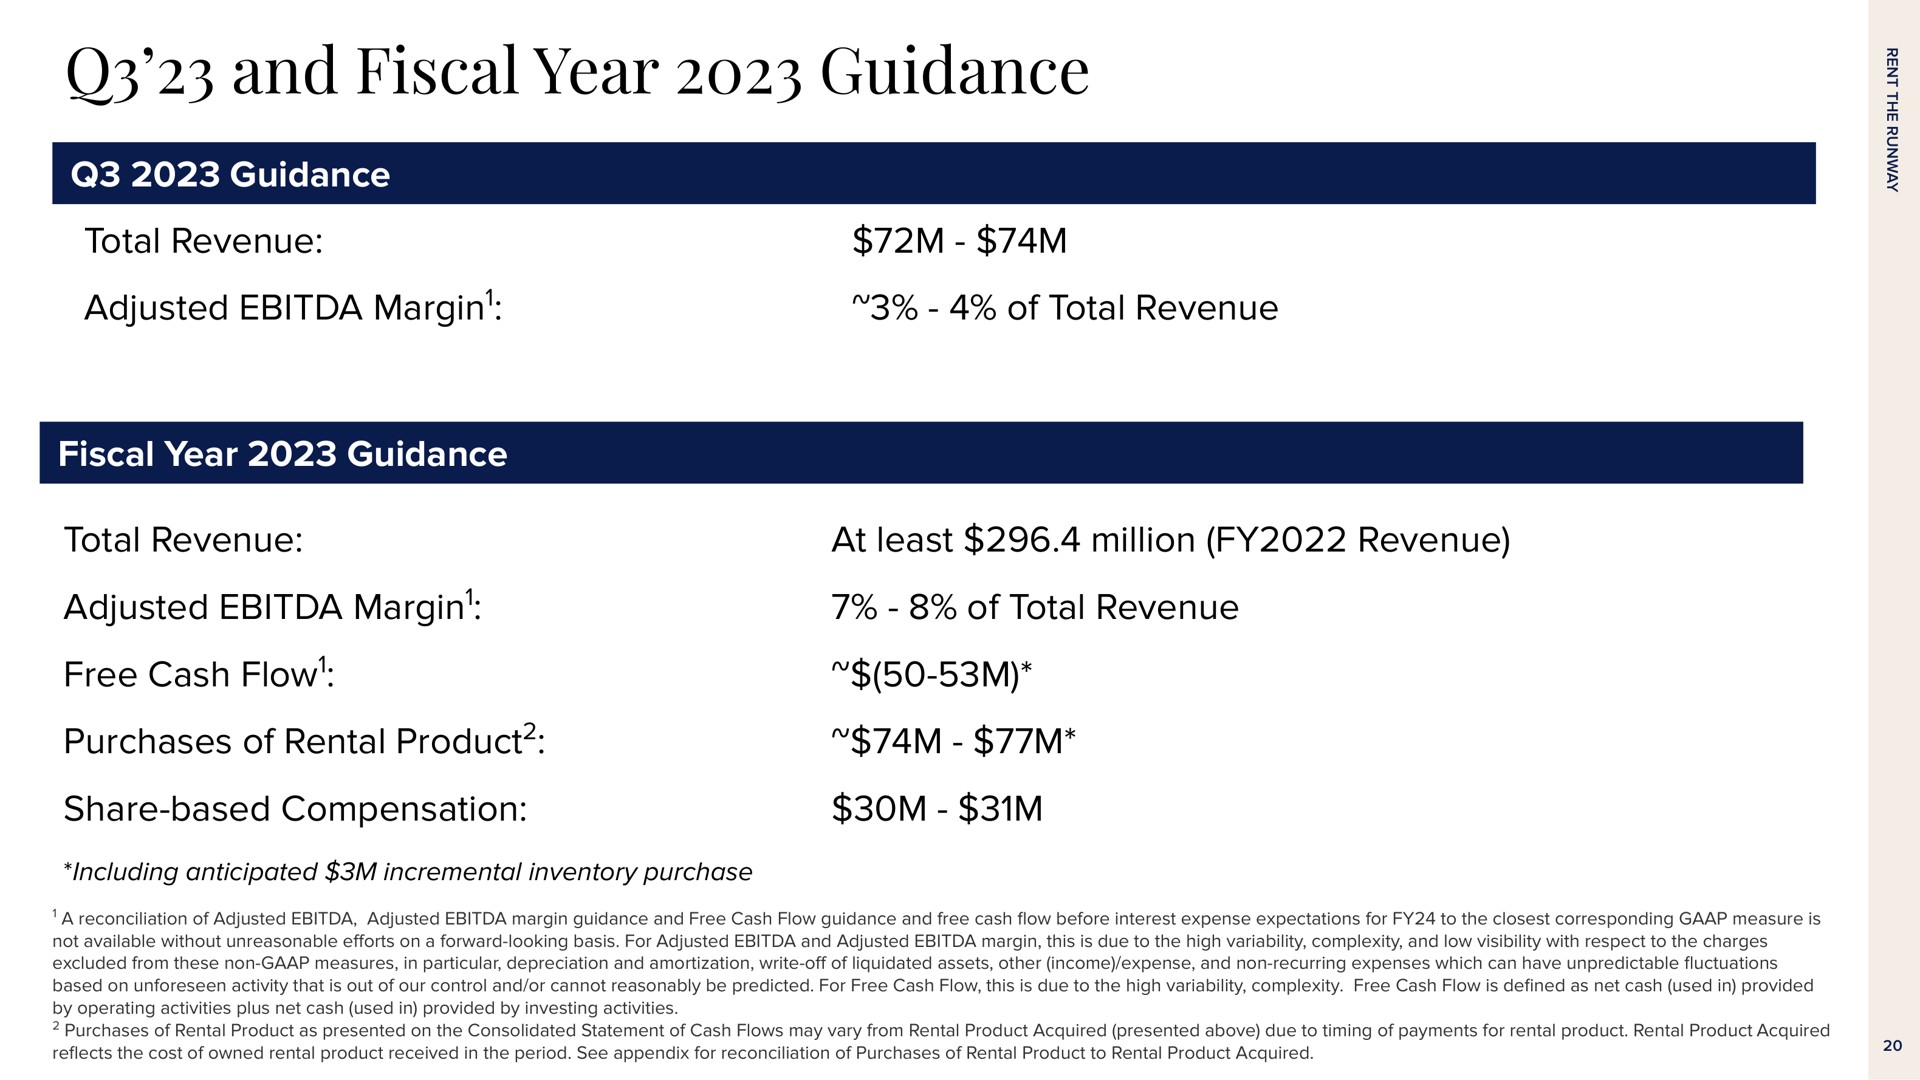 and fiscal year guidance guidance total revenue adjusted margin of total revenue fiscal year guidance total revenue at least million revenue adjusted margin of total revenue free cash flow purchases of rental product share based compensation | Rent The Runway